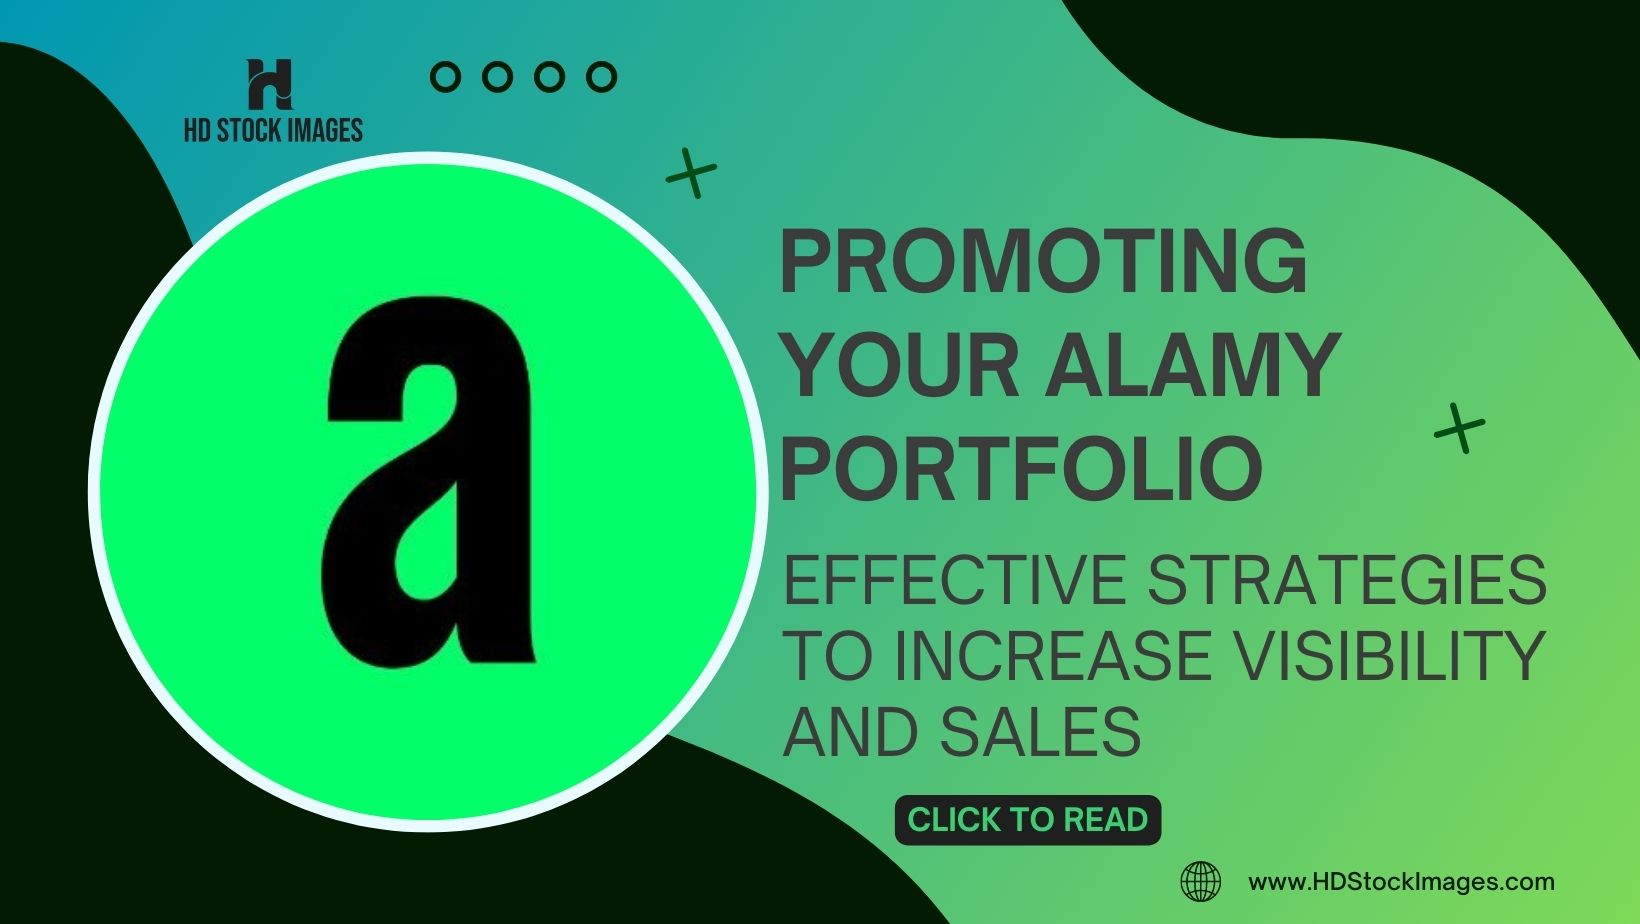 Promoting Your Alamy Portfolio: Effective Strategies to Increase Visibility and Sales